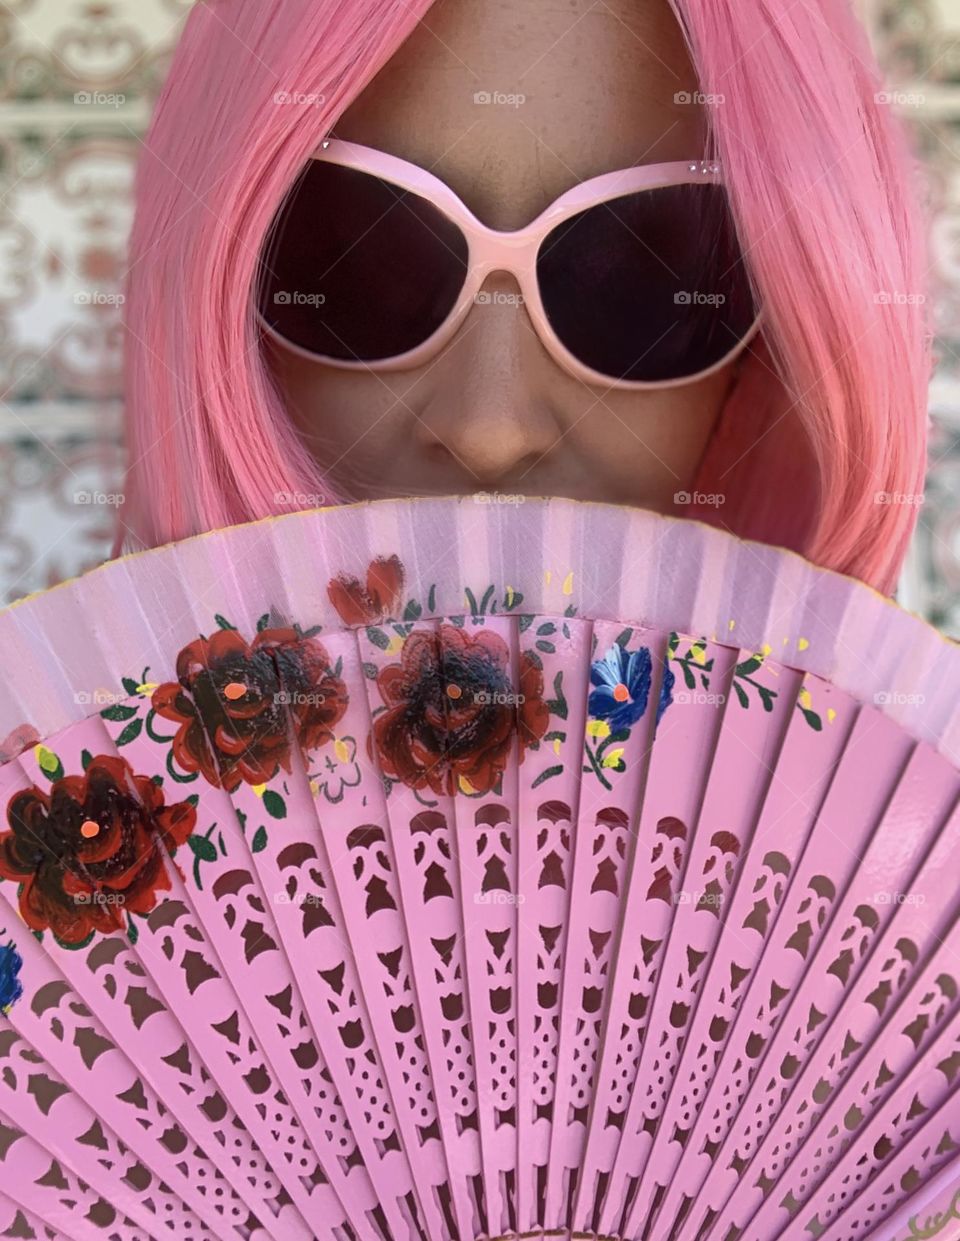 Barbie themed selfie with pink wig, sunglasses and hand fan